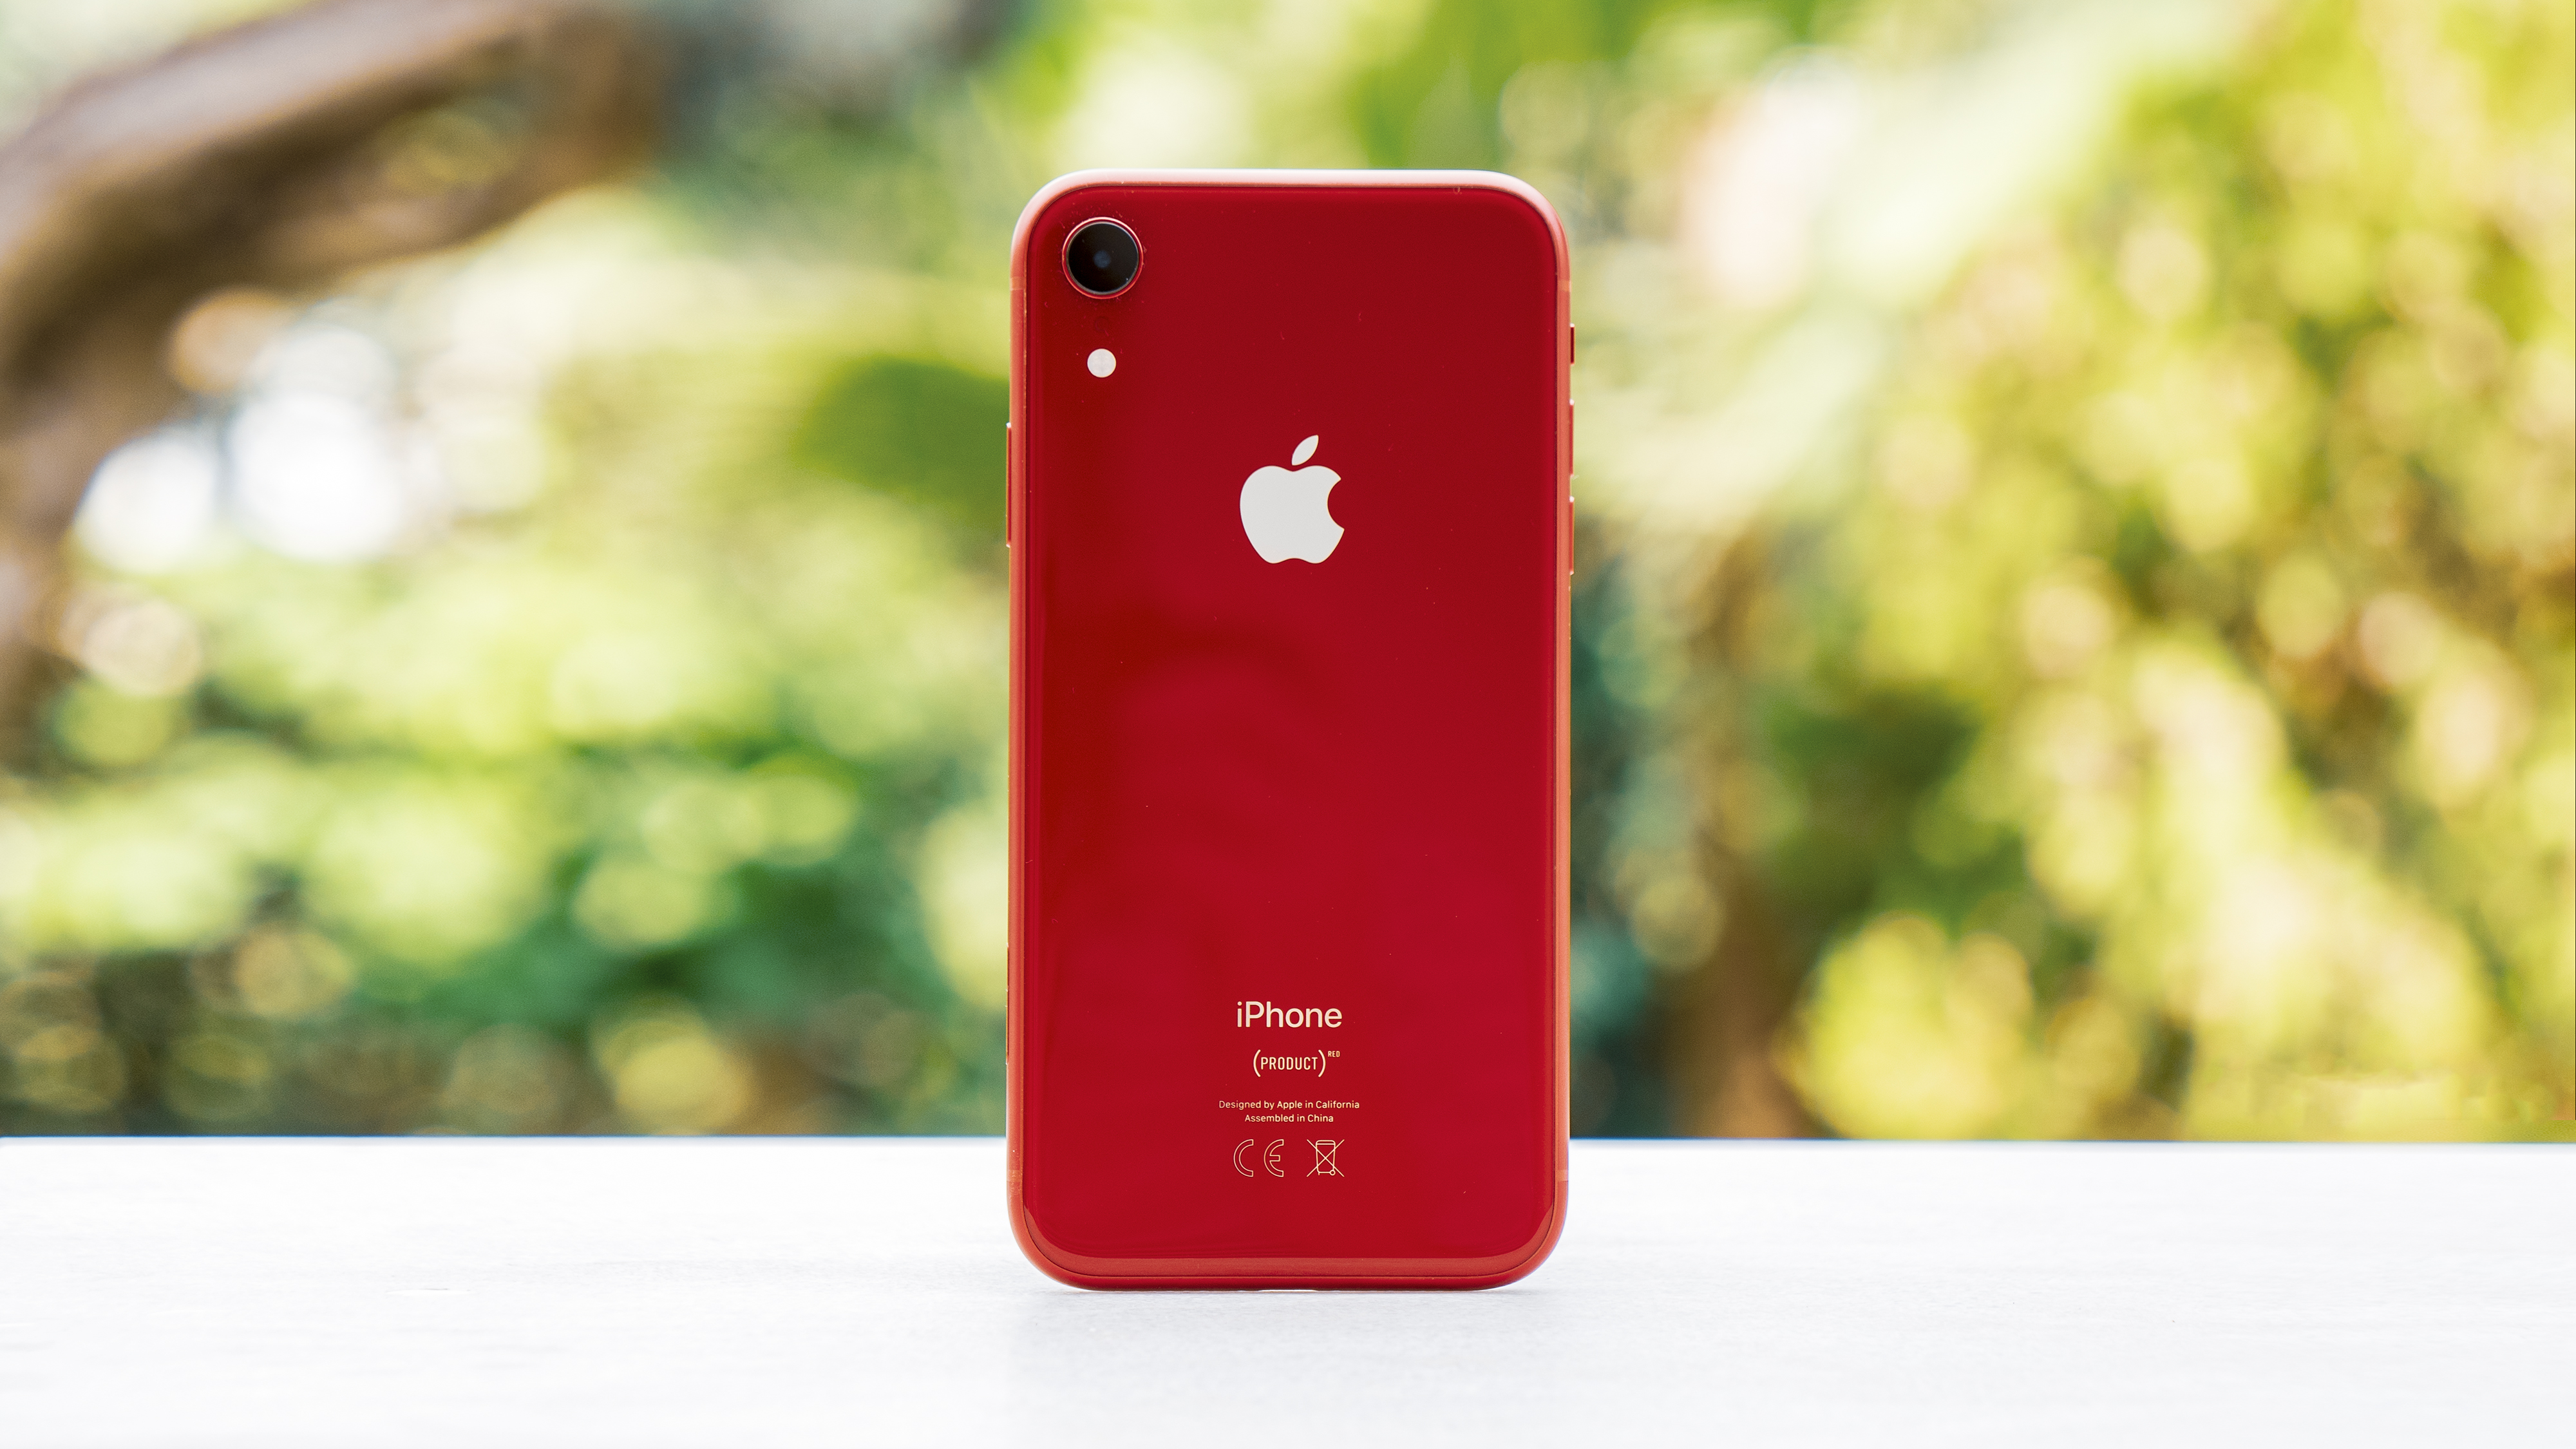 Apple iPhone XR pictures, official photos